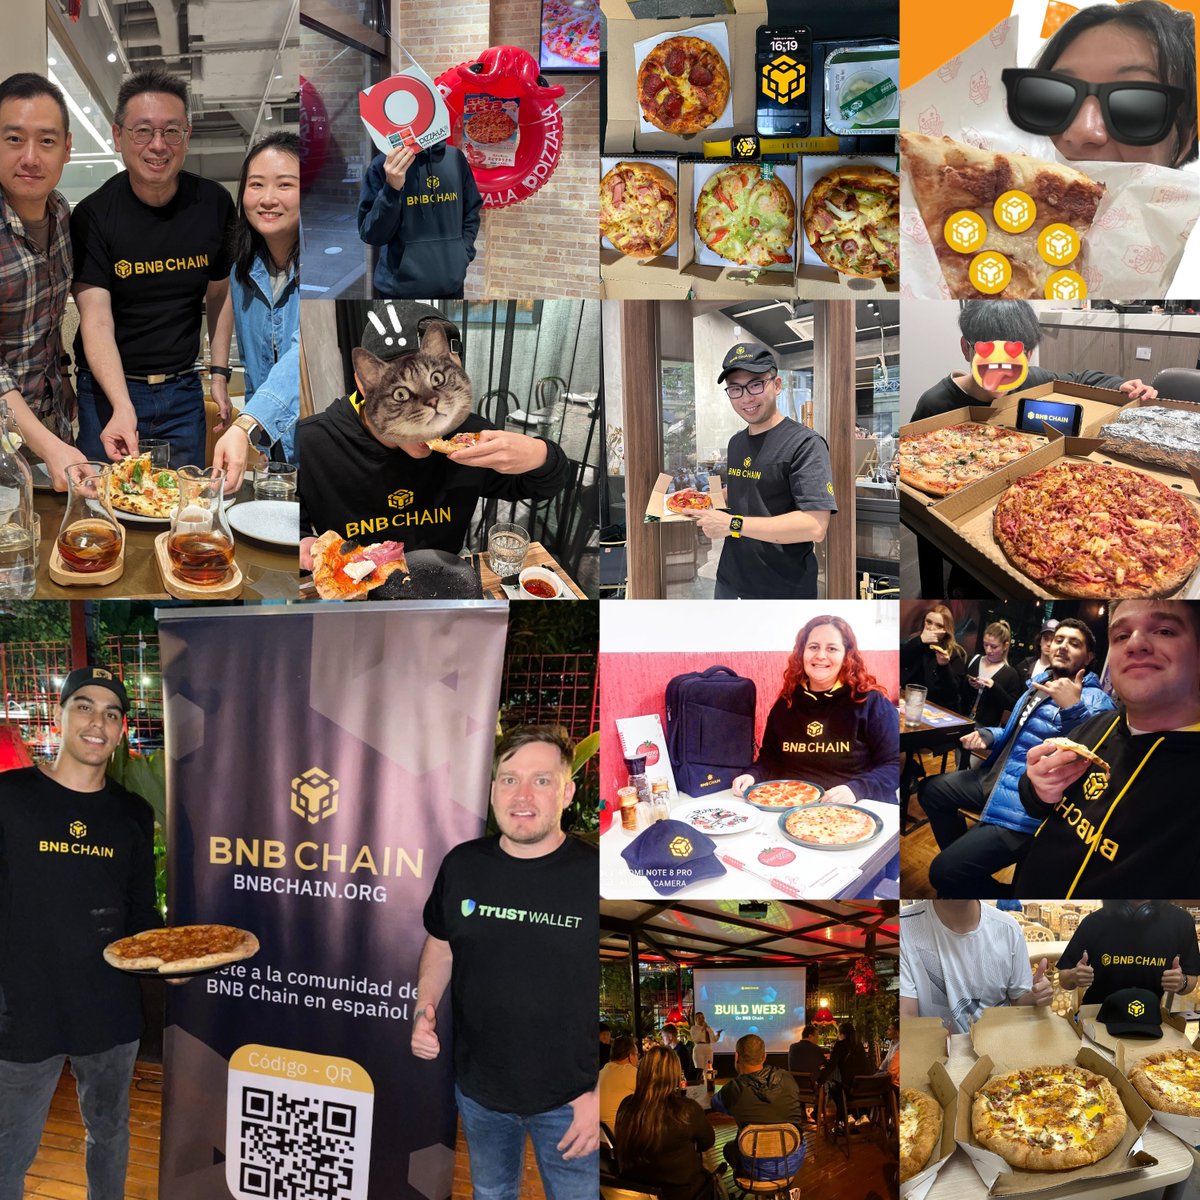 Bitcoin Pizza Day was an absolute blast! 🤩 Cheers to many more community moments like these! 🍕🎉 #BNBPizzaDay